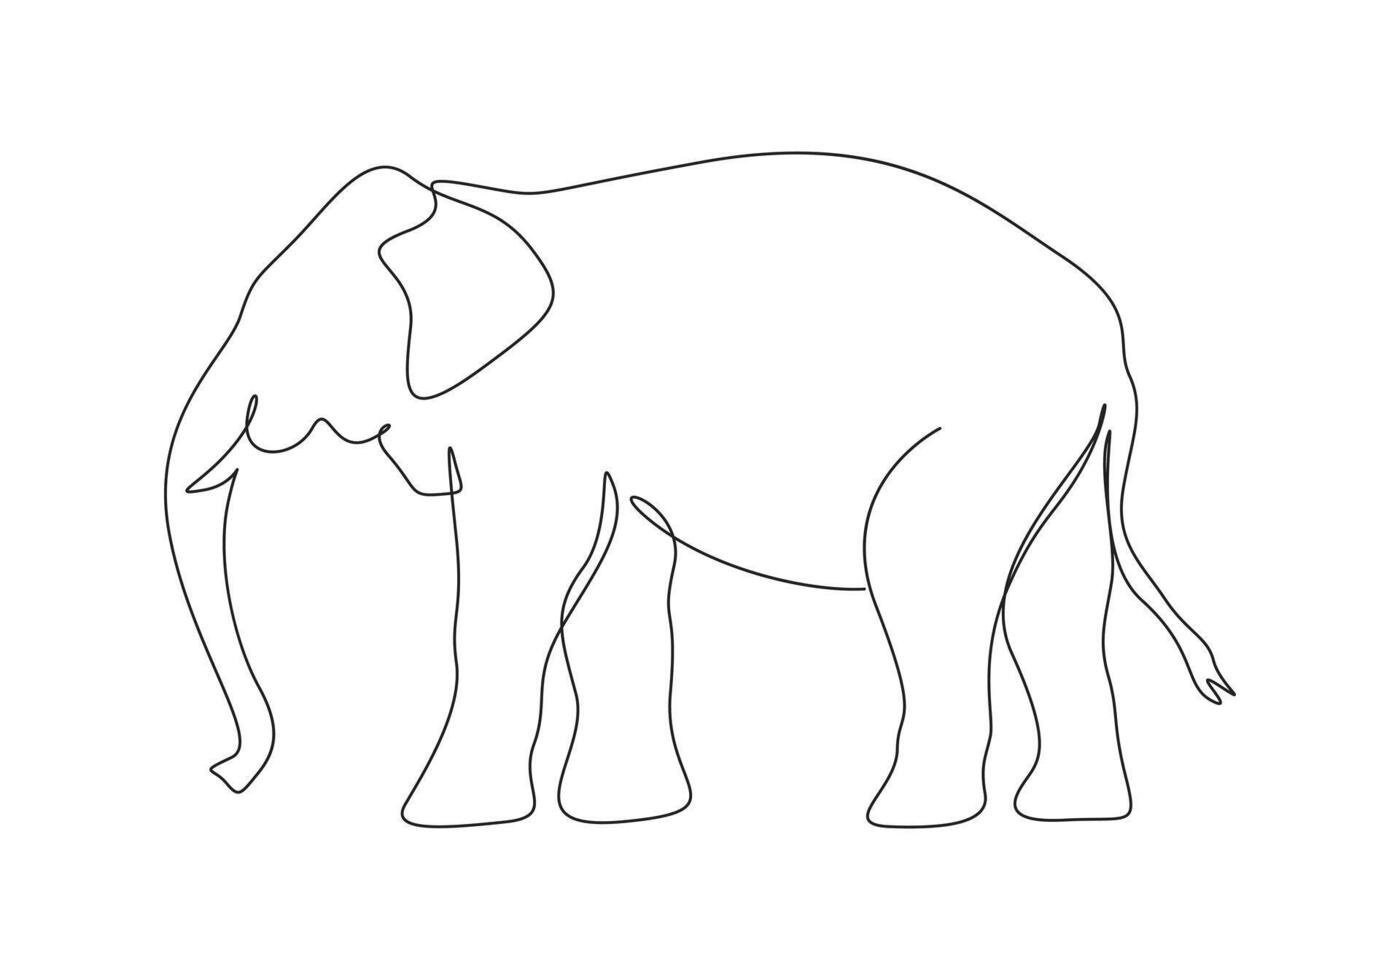 Elephant continuous single line drawing pro illustration vector